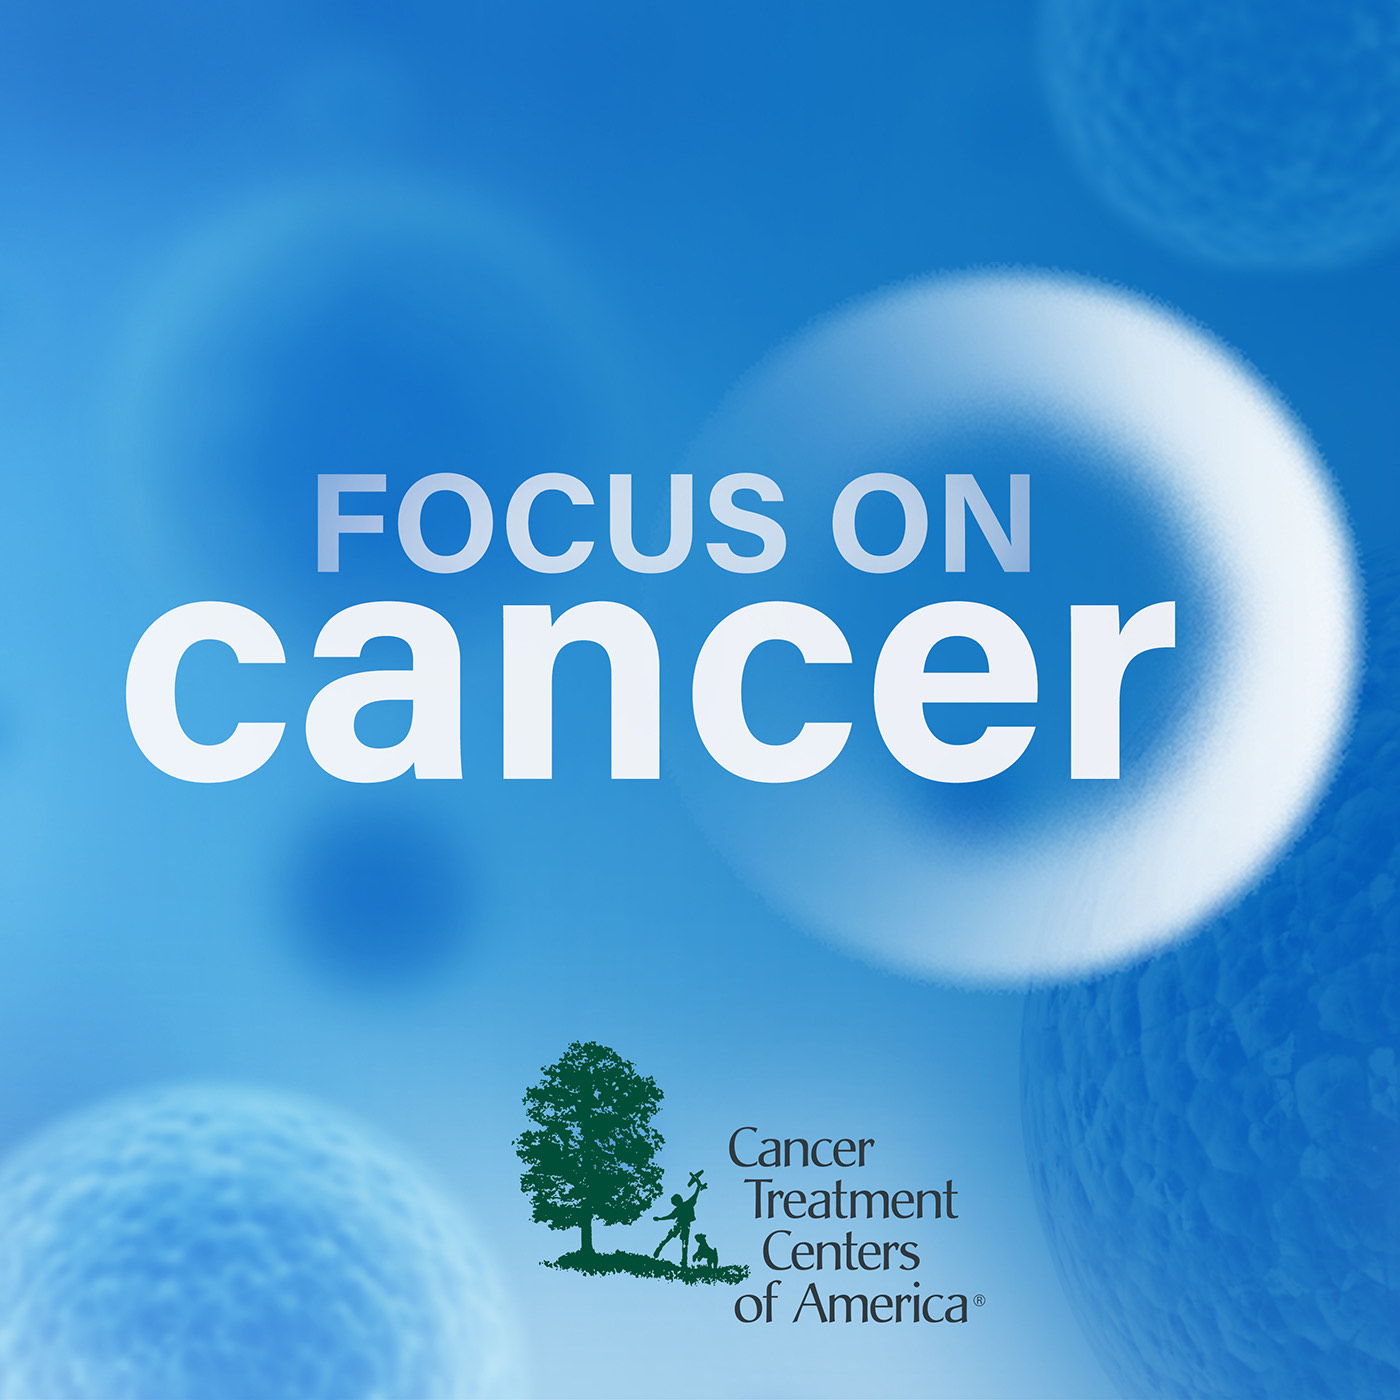 S2E3 | Managing cancer risk: Screening and prevention